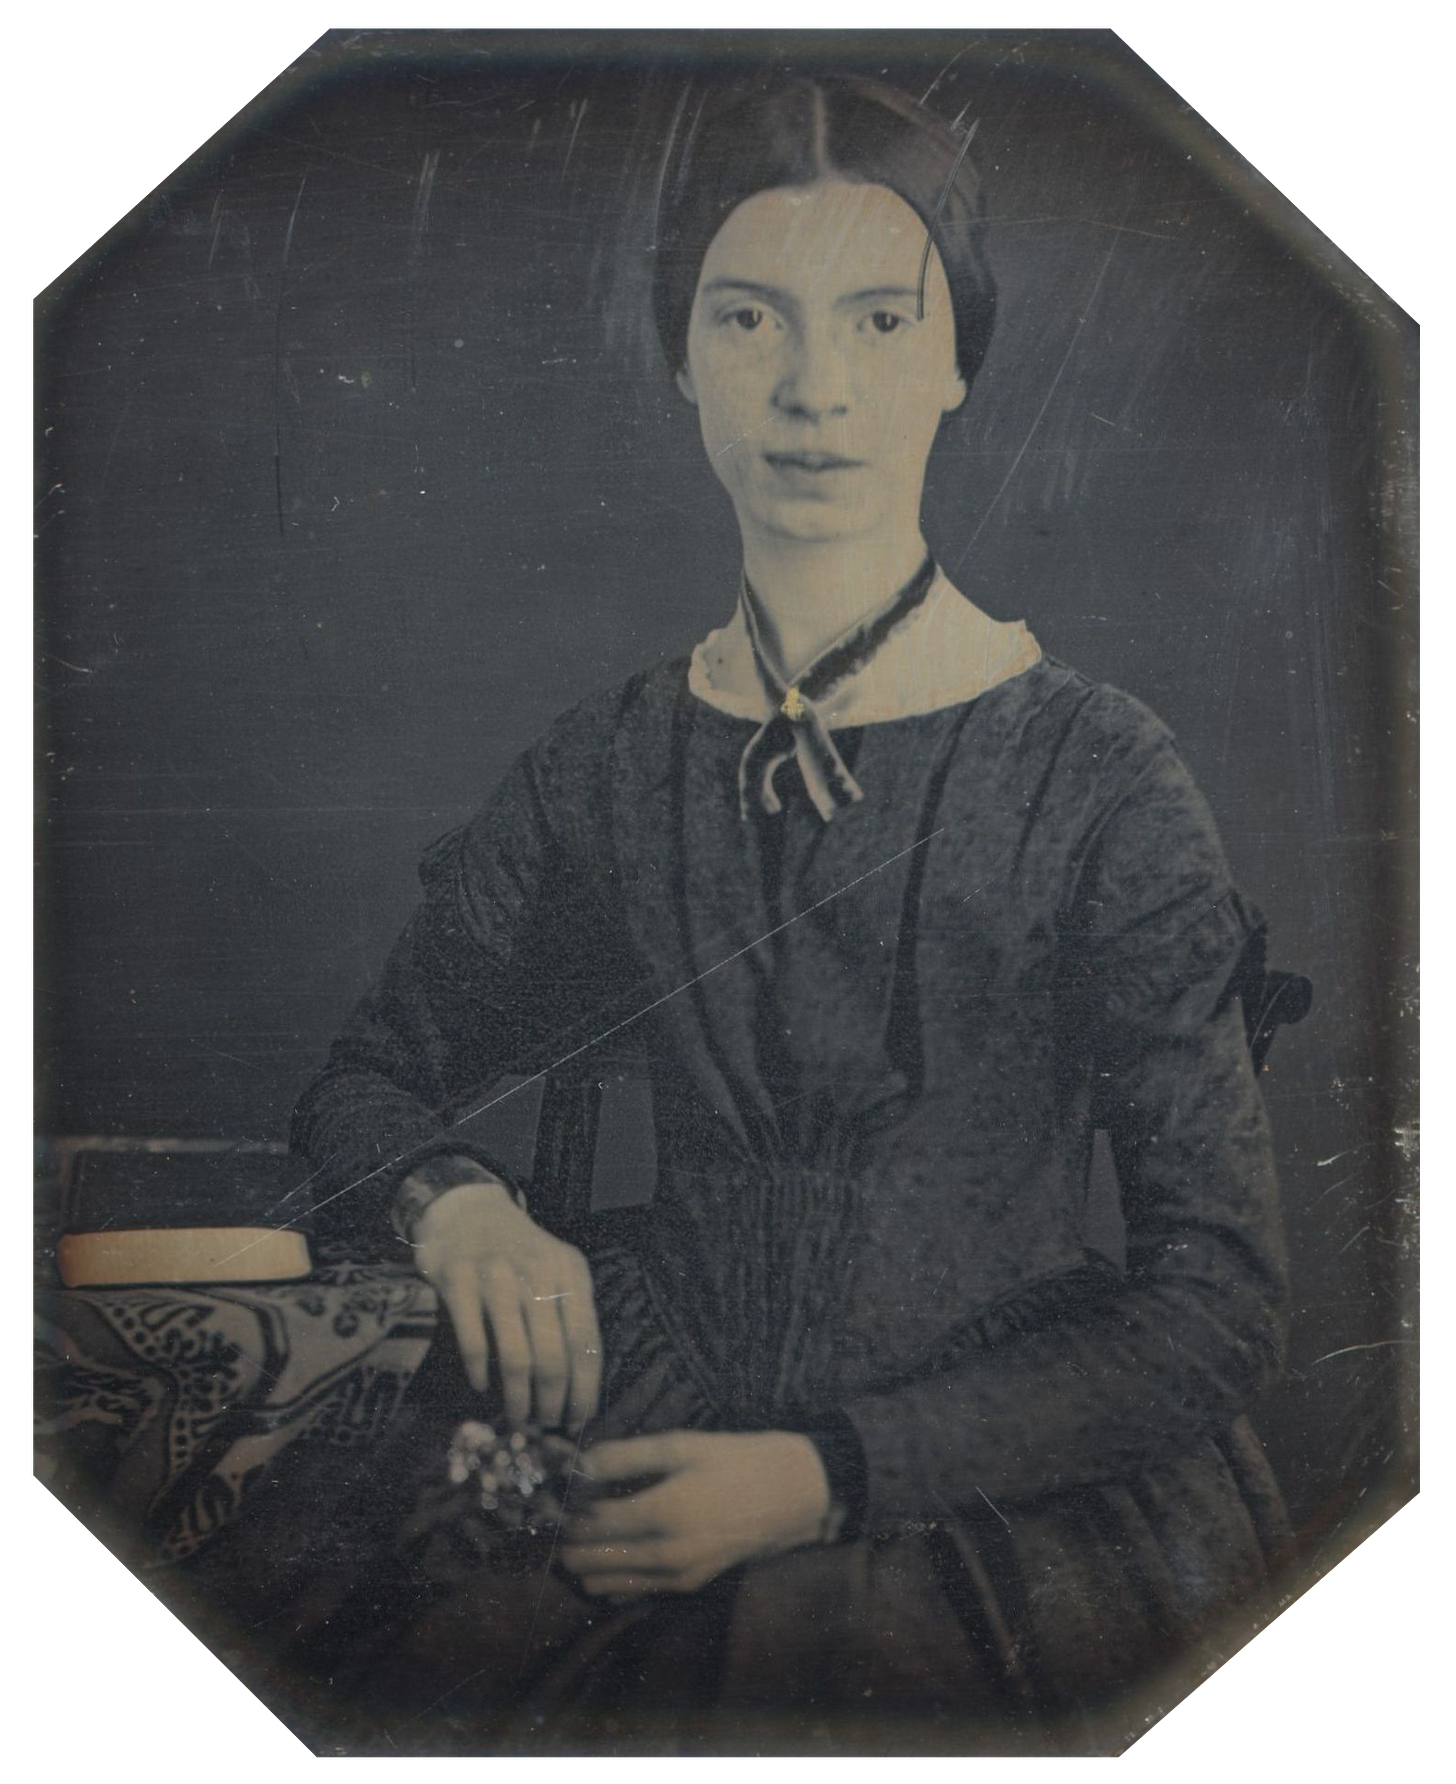 https://upload.wikimedia.org/wikipedia/commons/5/56/Black-white_photograph_of_Emily_Dickinson2.png